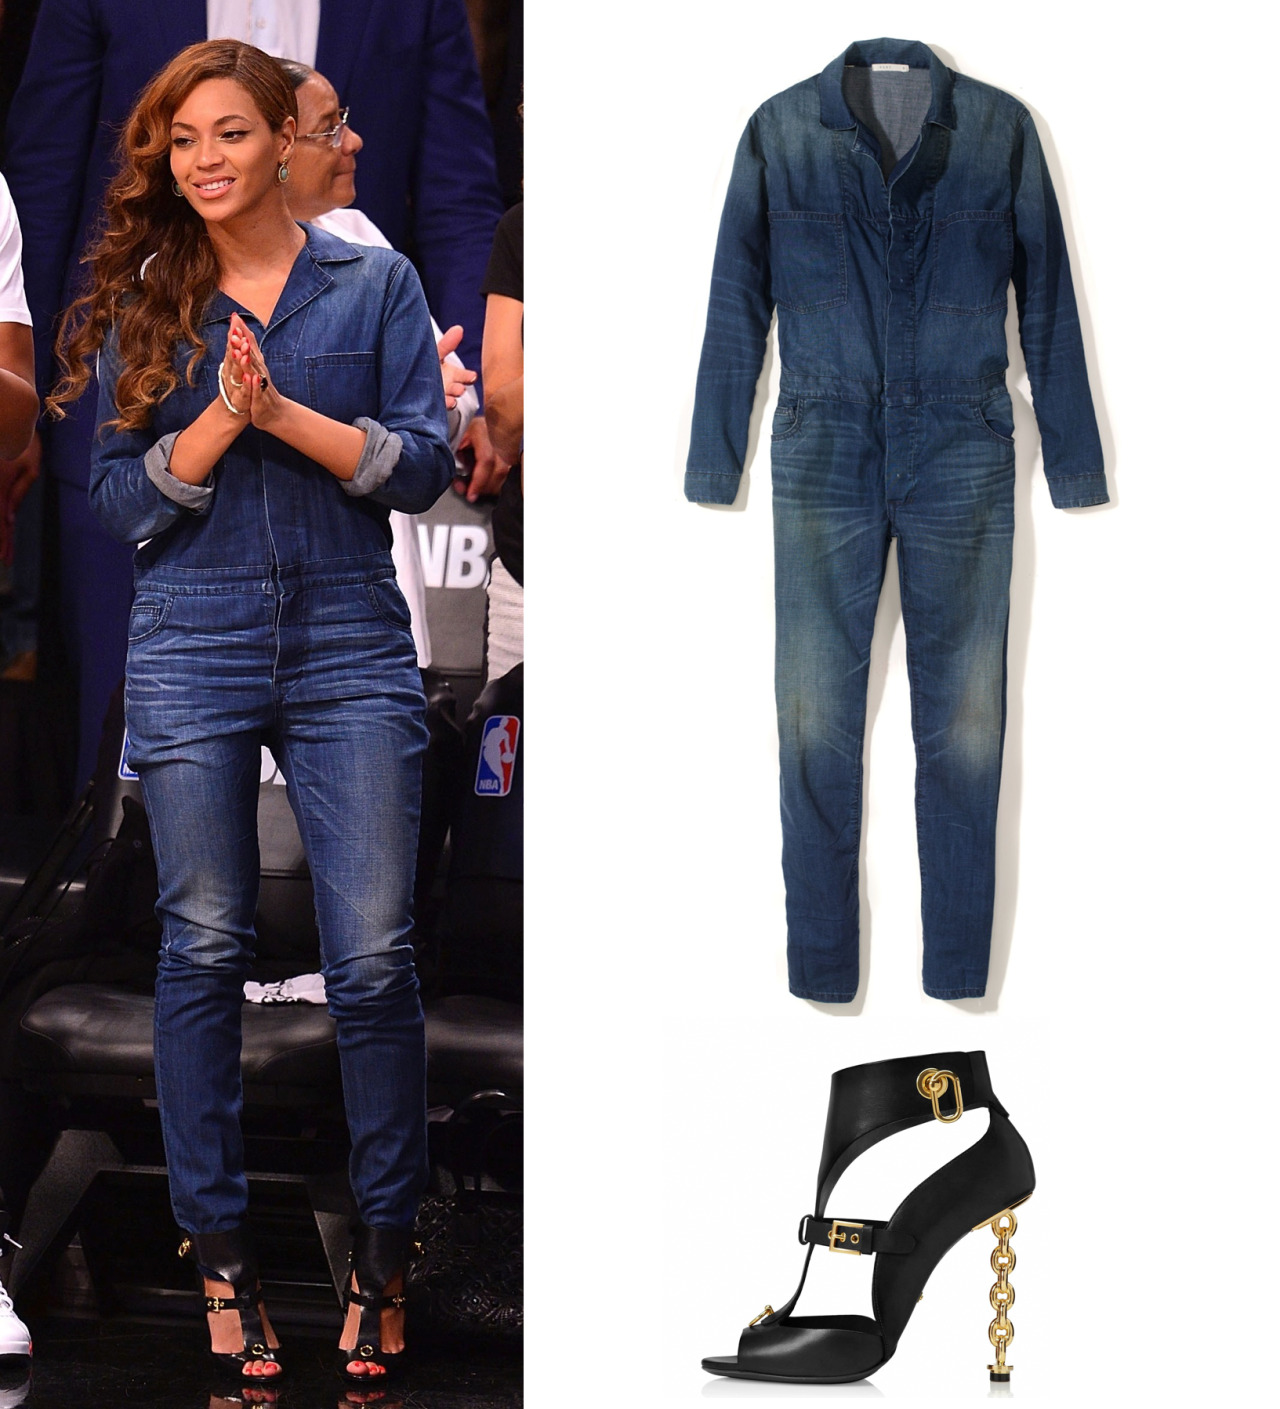 beyonceinfo:
“ Beyoncé was wearing 6397 hidden placket denim jumpsuit ($595) and Tom Ford leather chain heel gladiator sandals ($2,300)
”